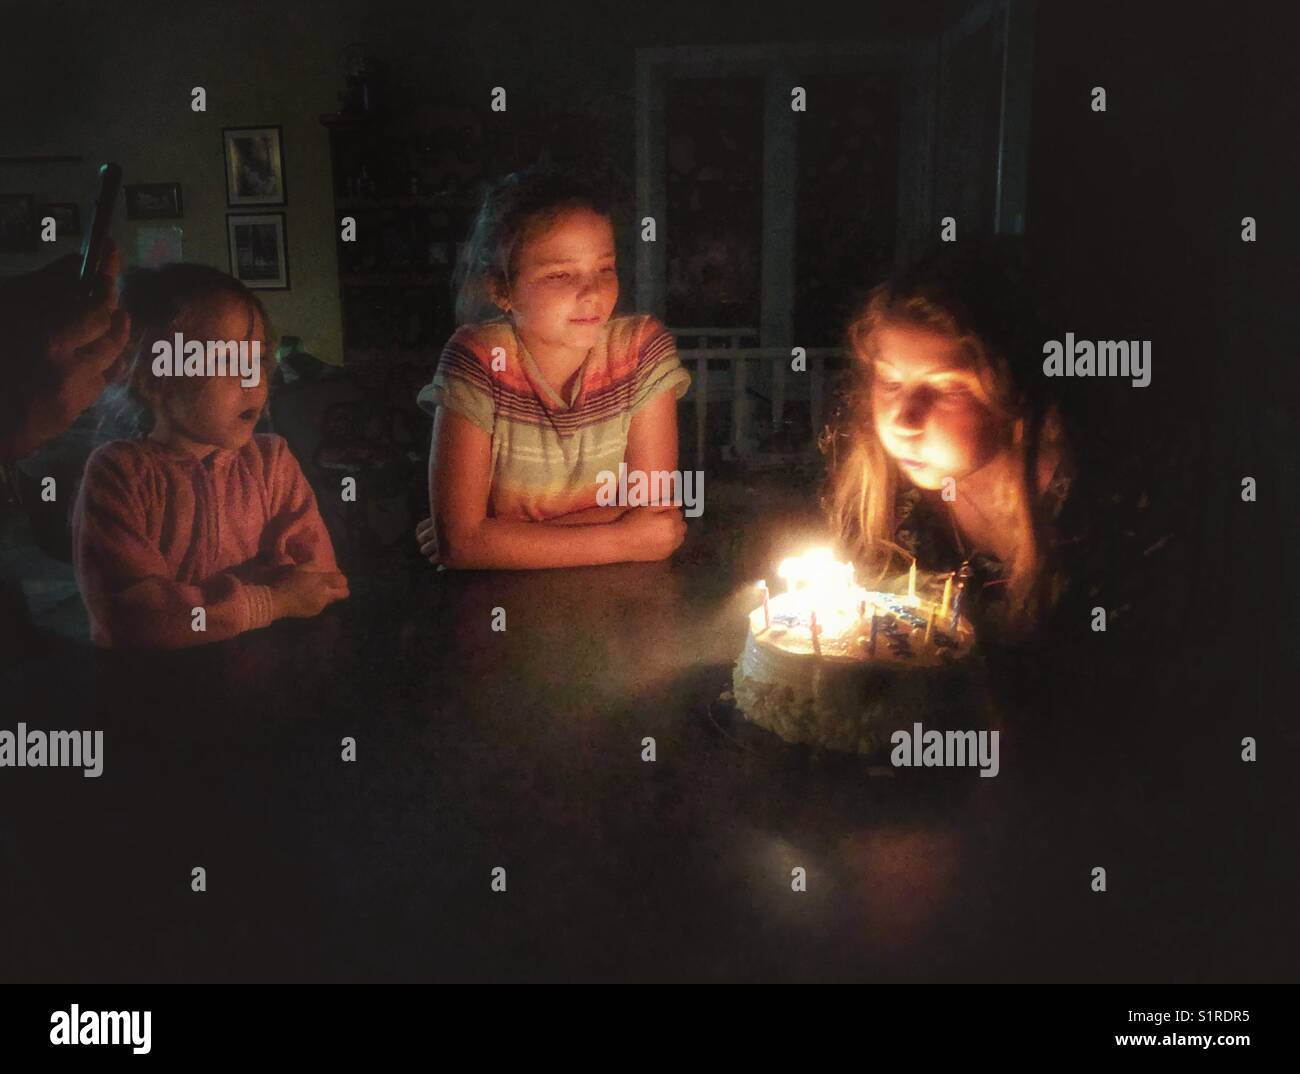 Girl blowing out the candles on her birthday cake with sisters watching Stock Photo